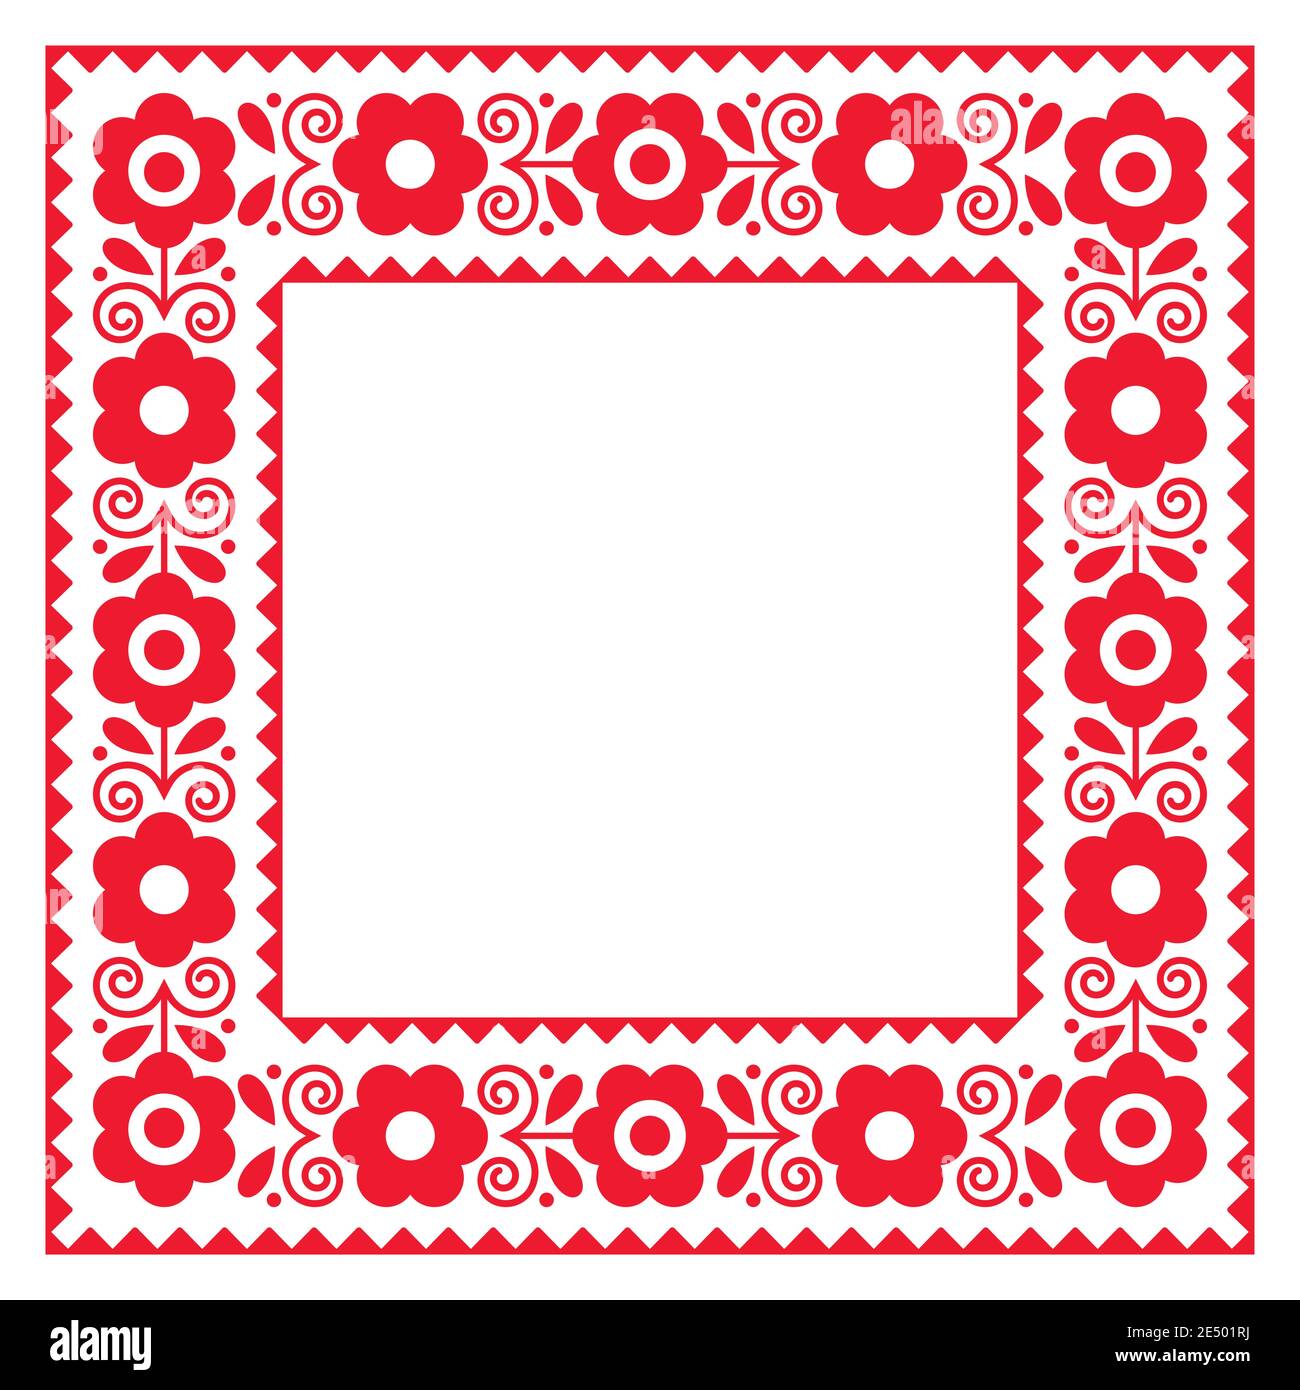 Polish floral folk art cute square frame vector design, perfect for greeting card or wedding invitation Stock Vector